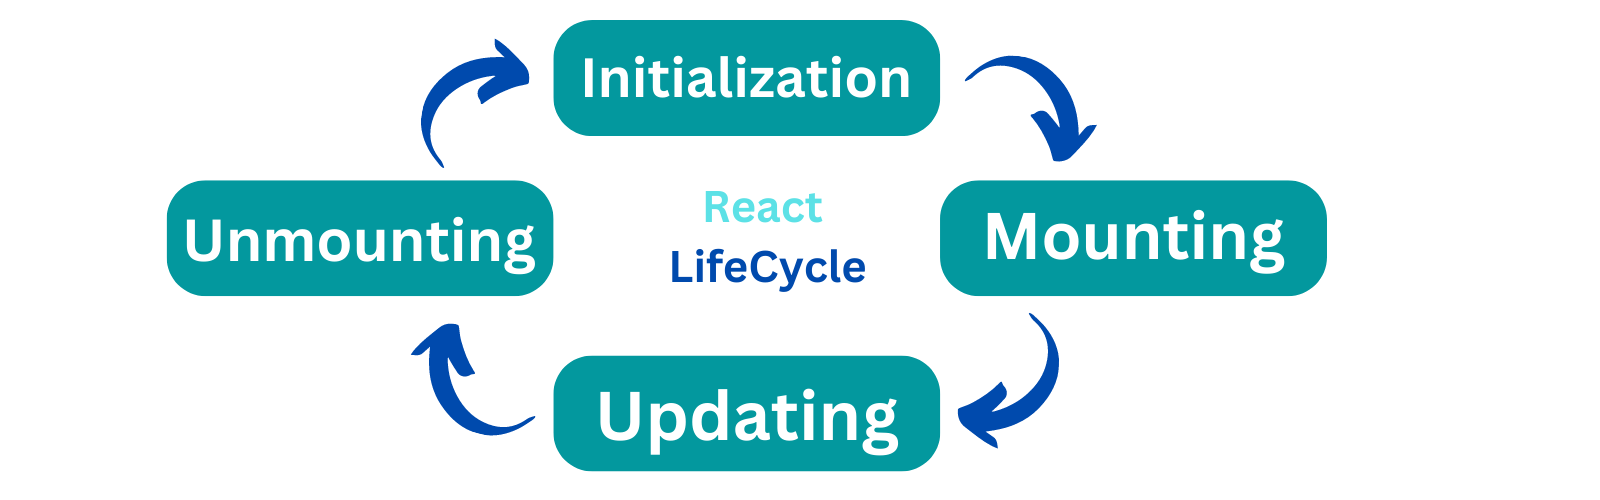 React LifeCycle.png